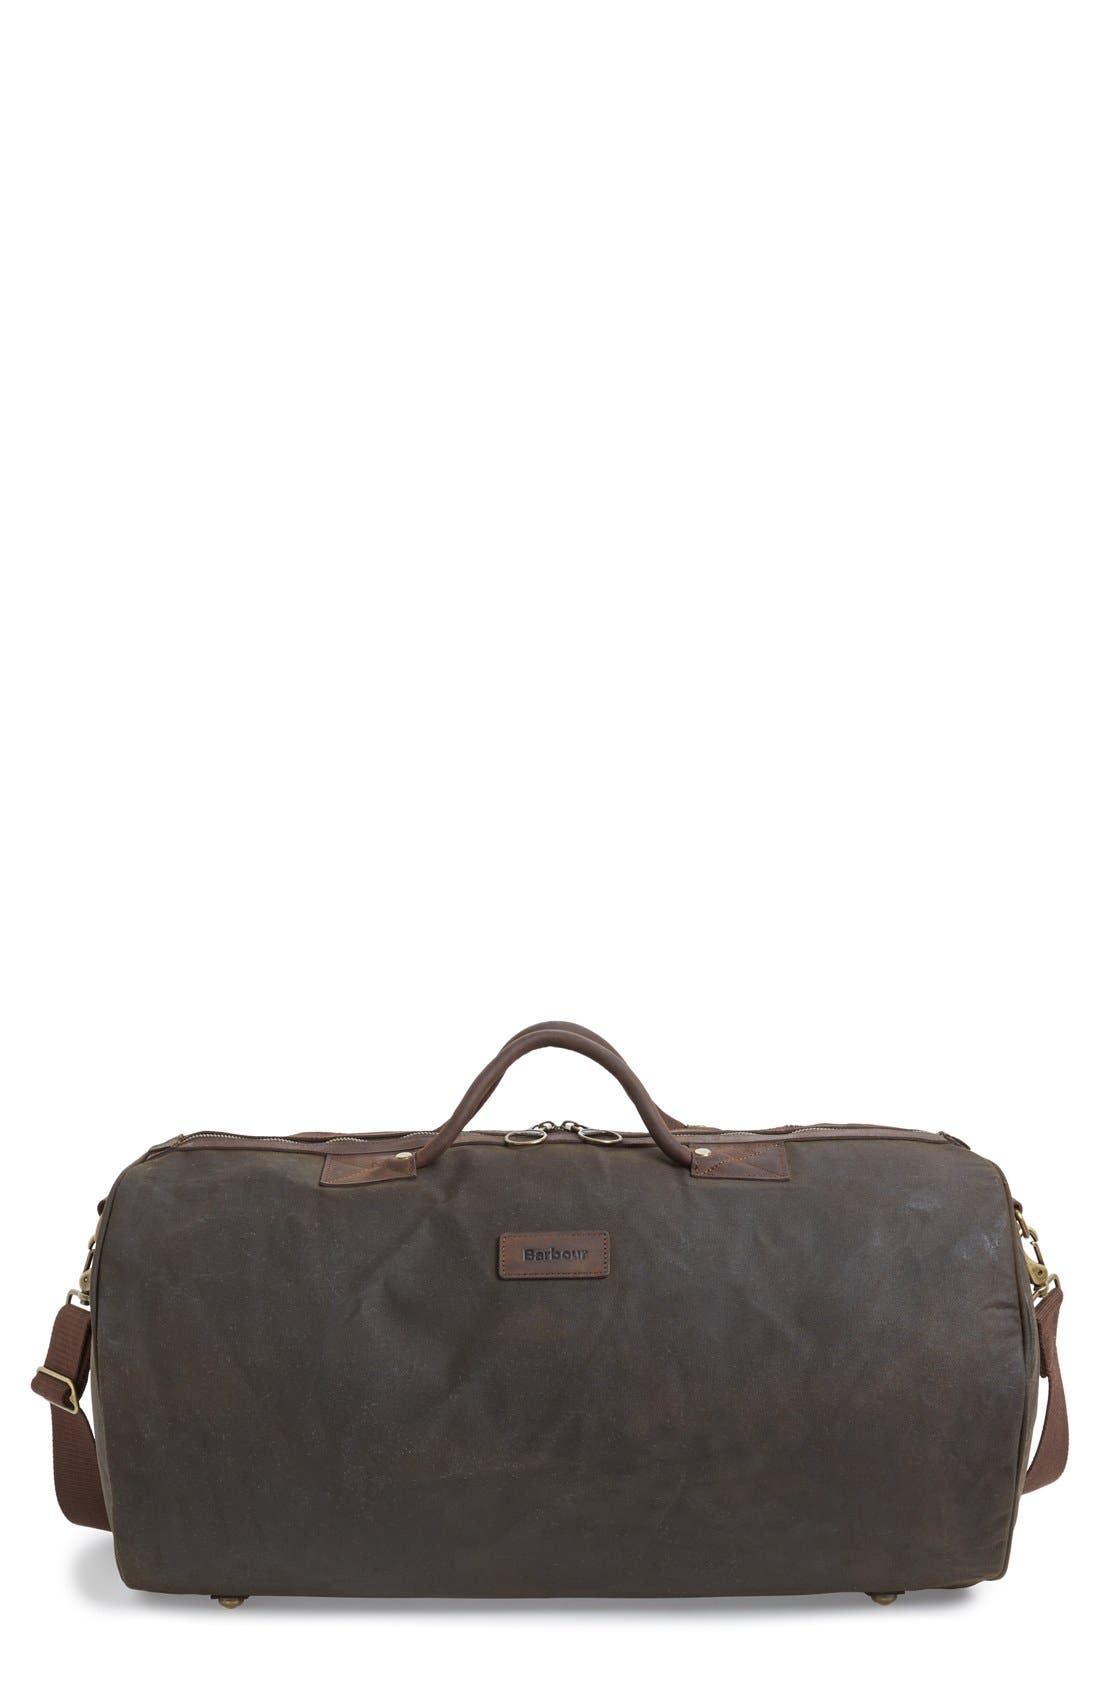 Barbour Waxed Canvas Duffle Bag | Nordstrom